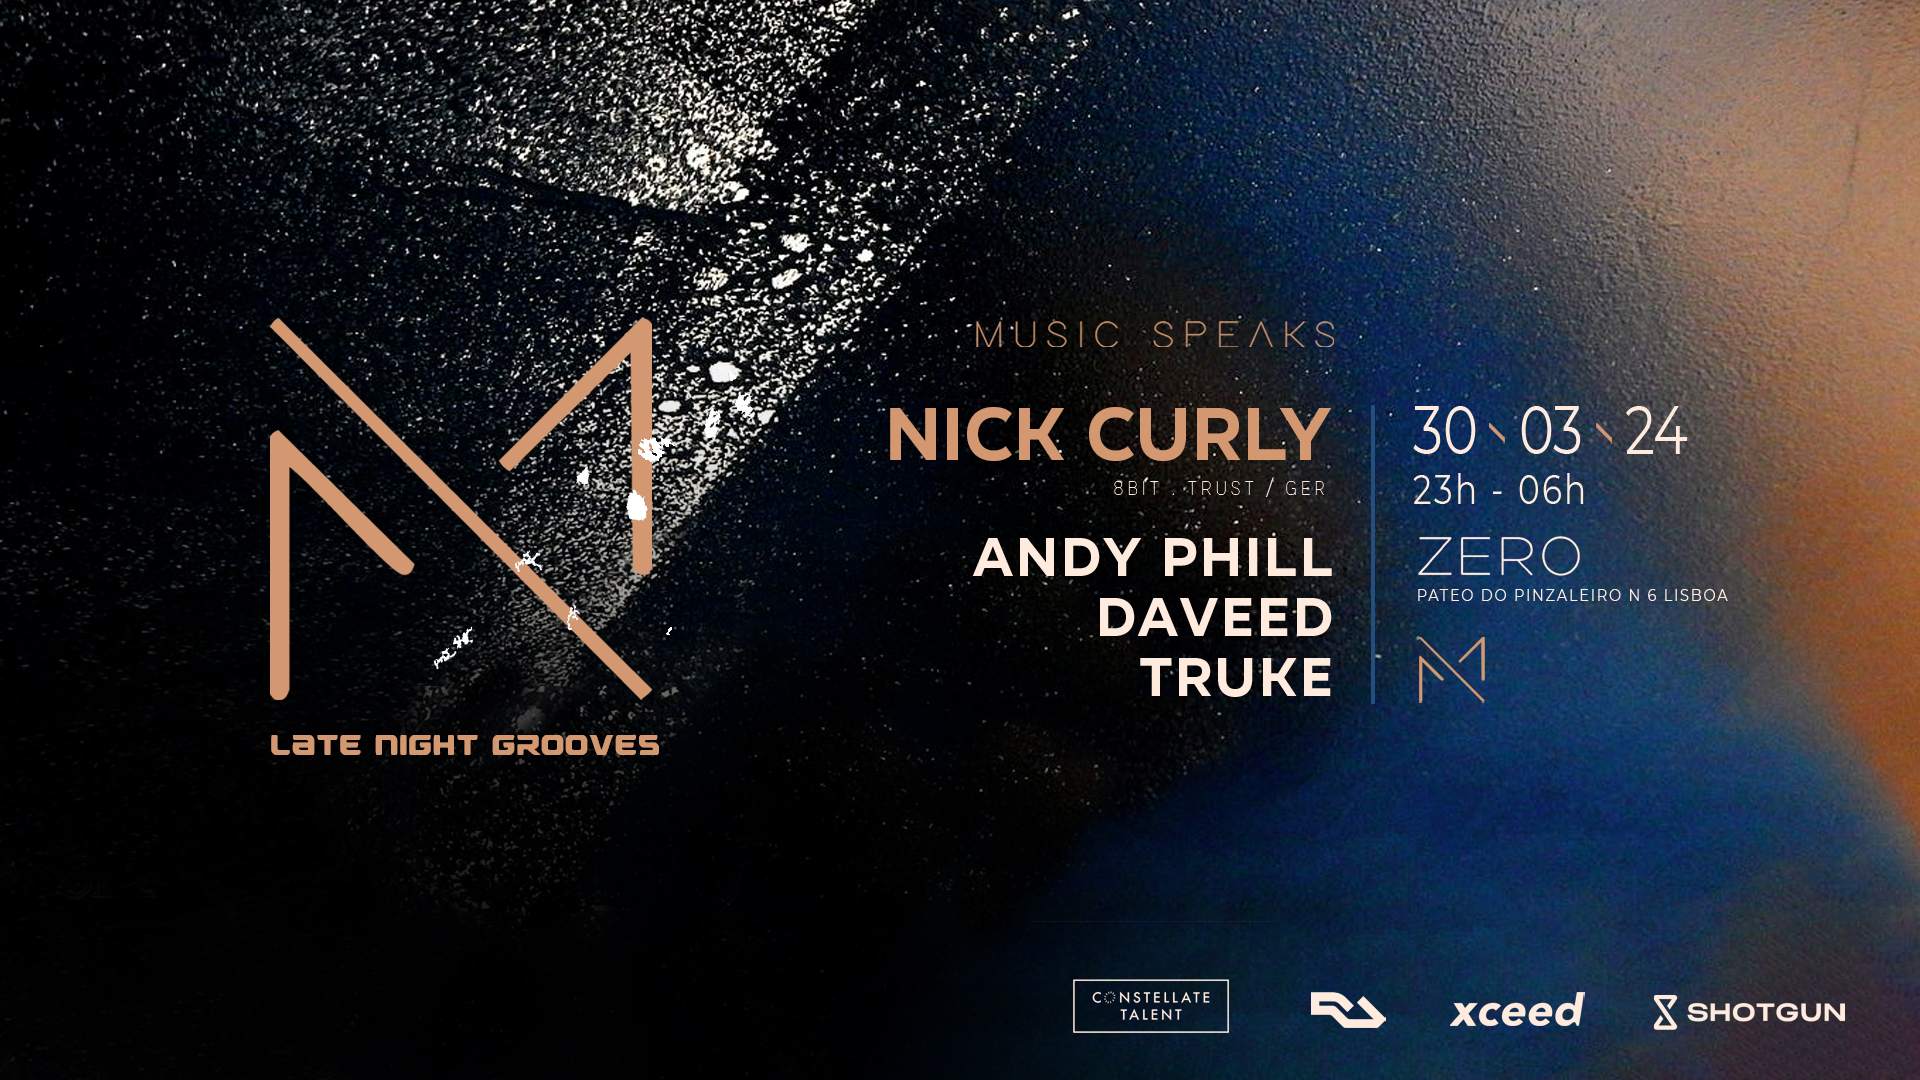 [CANCELLED] Late Night Grooves with Nick Curly - Página frontal